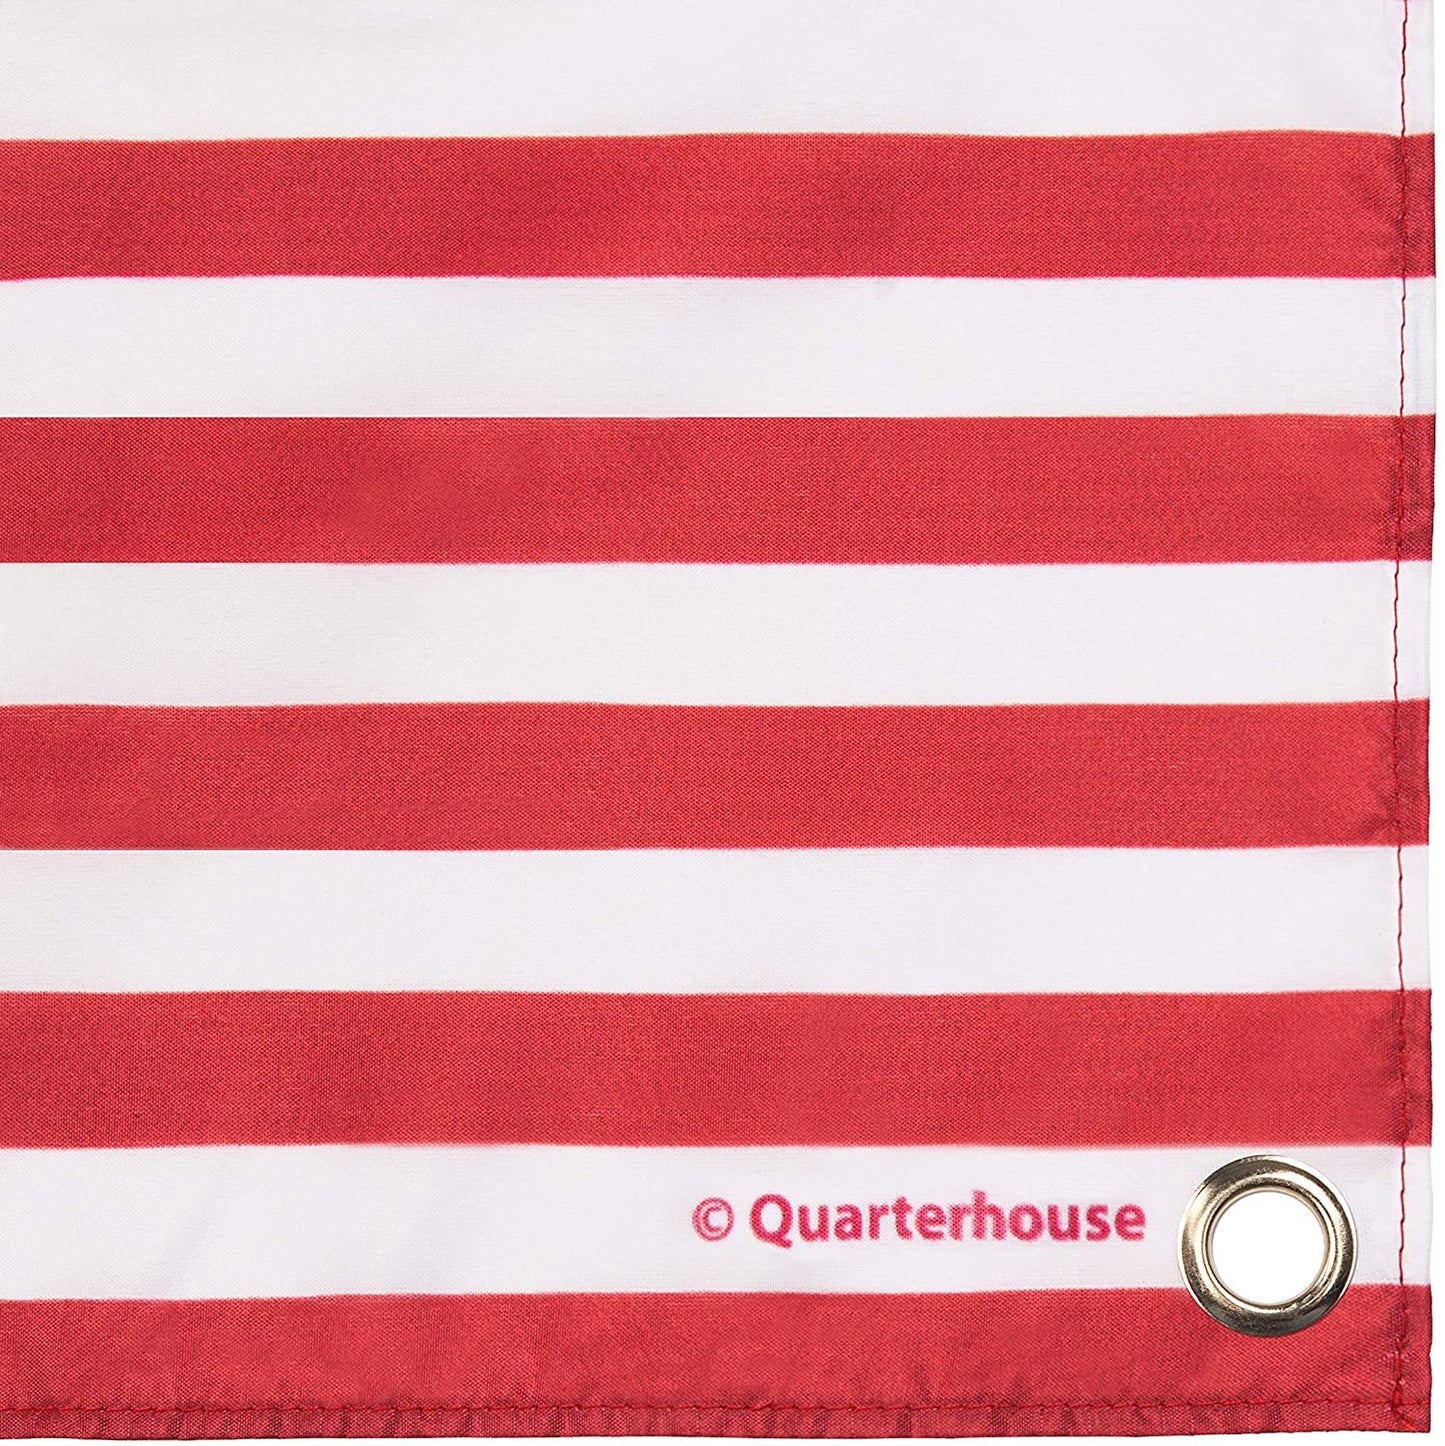 Quarterhouse English Welcome Banner for ESL Classrooms, Bilingual Businesses, Special Events - Flag of The United States (Red, White & Blue) Background - Polyester, 60 x 10 Inches